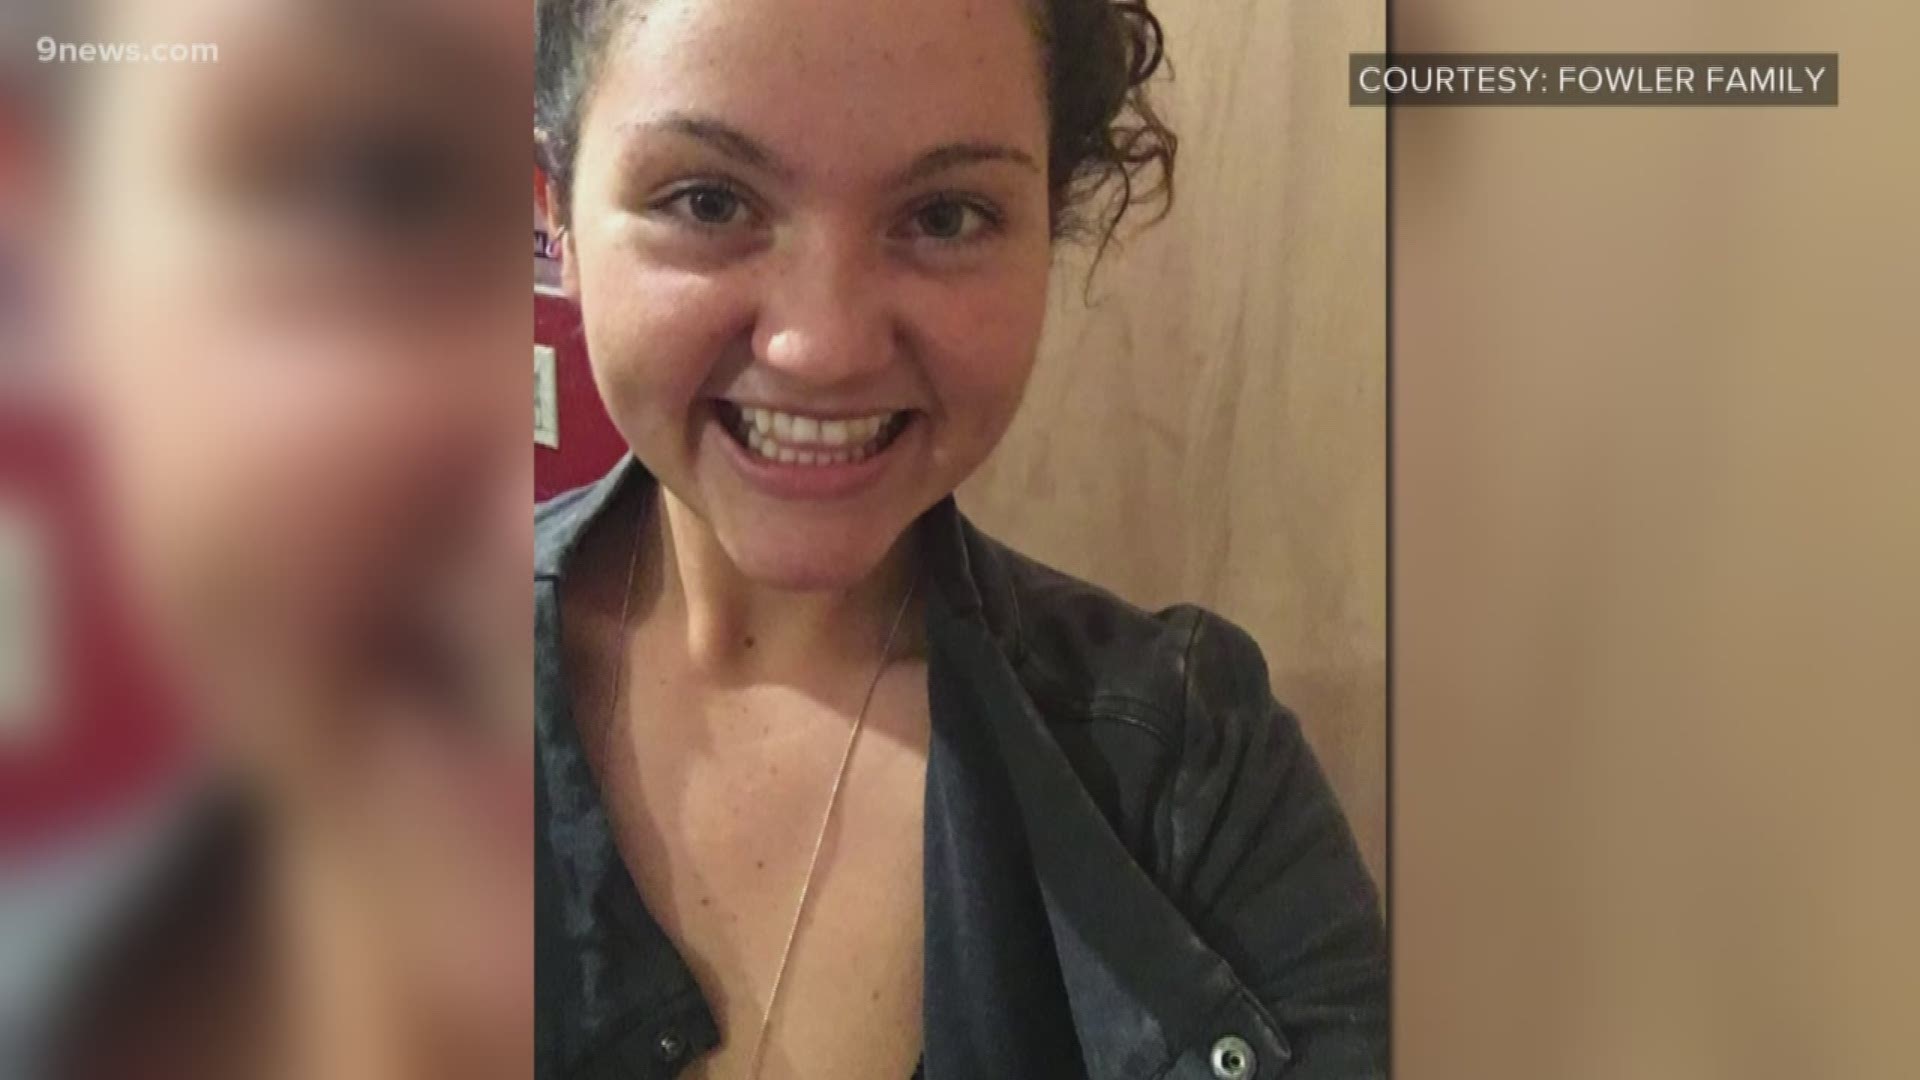 20-year-old McKenna Fowler was described by family as ambitious, special and vibrant.